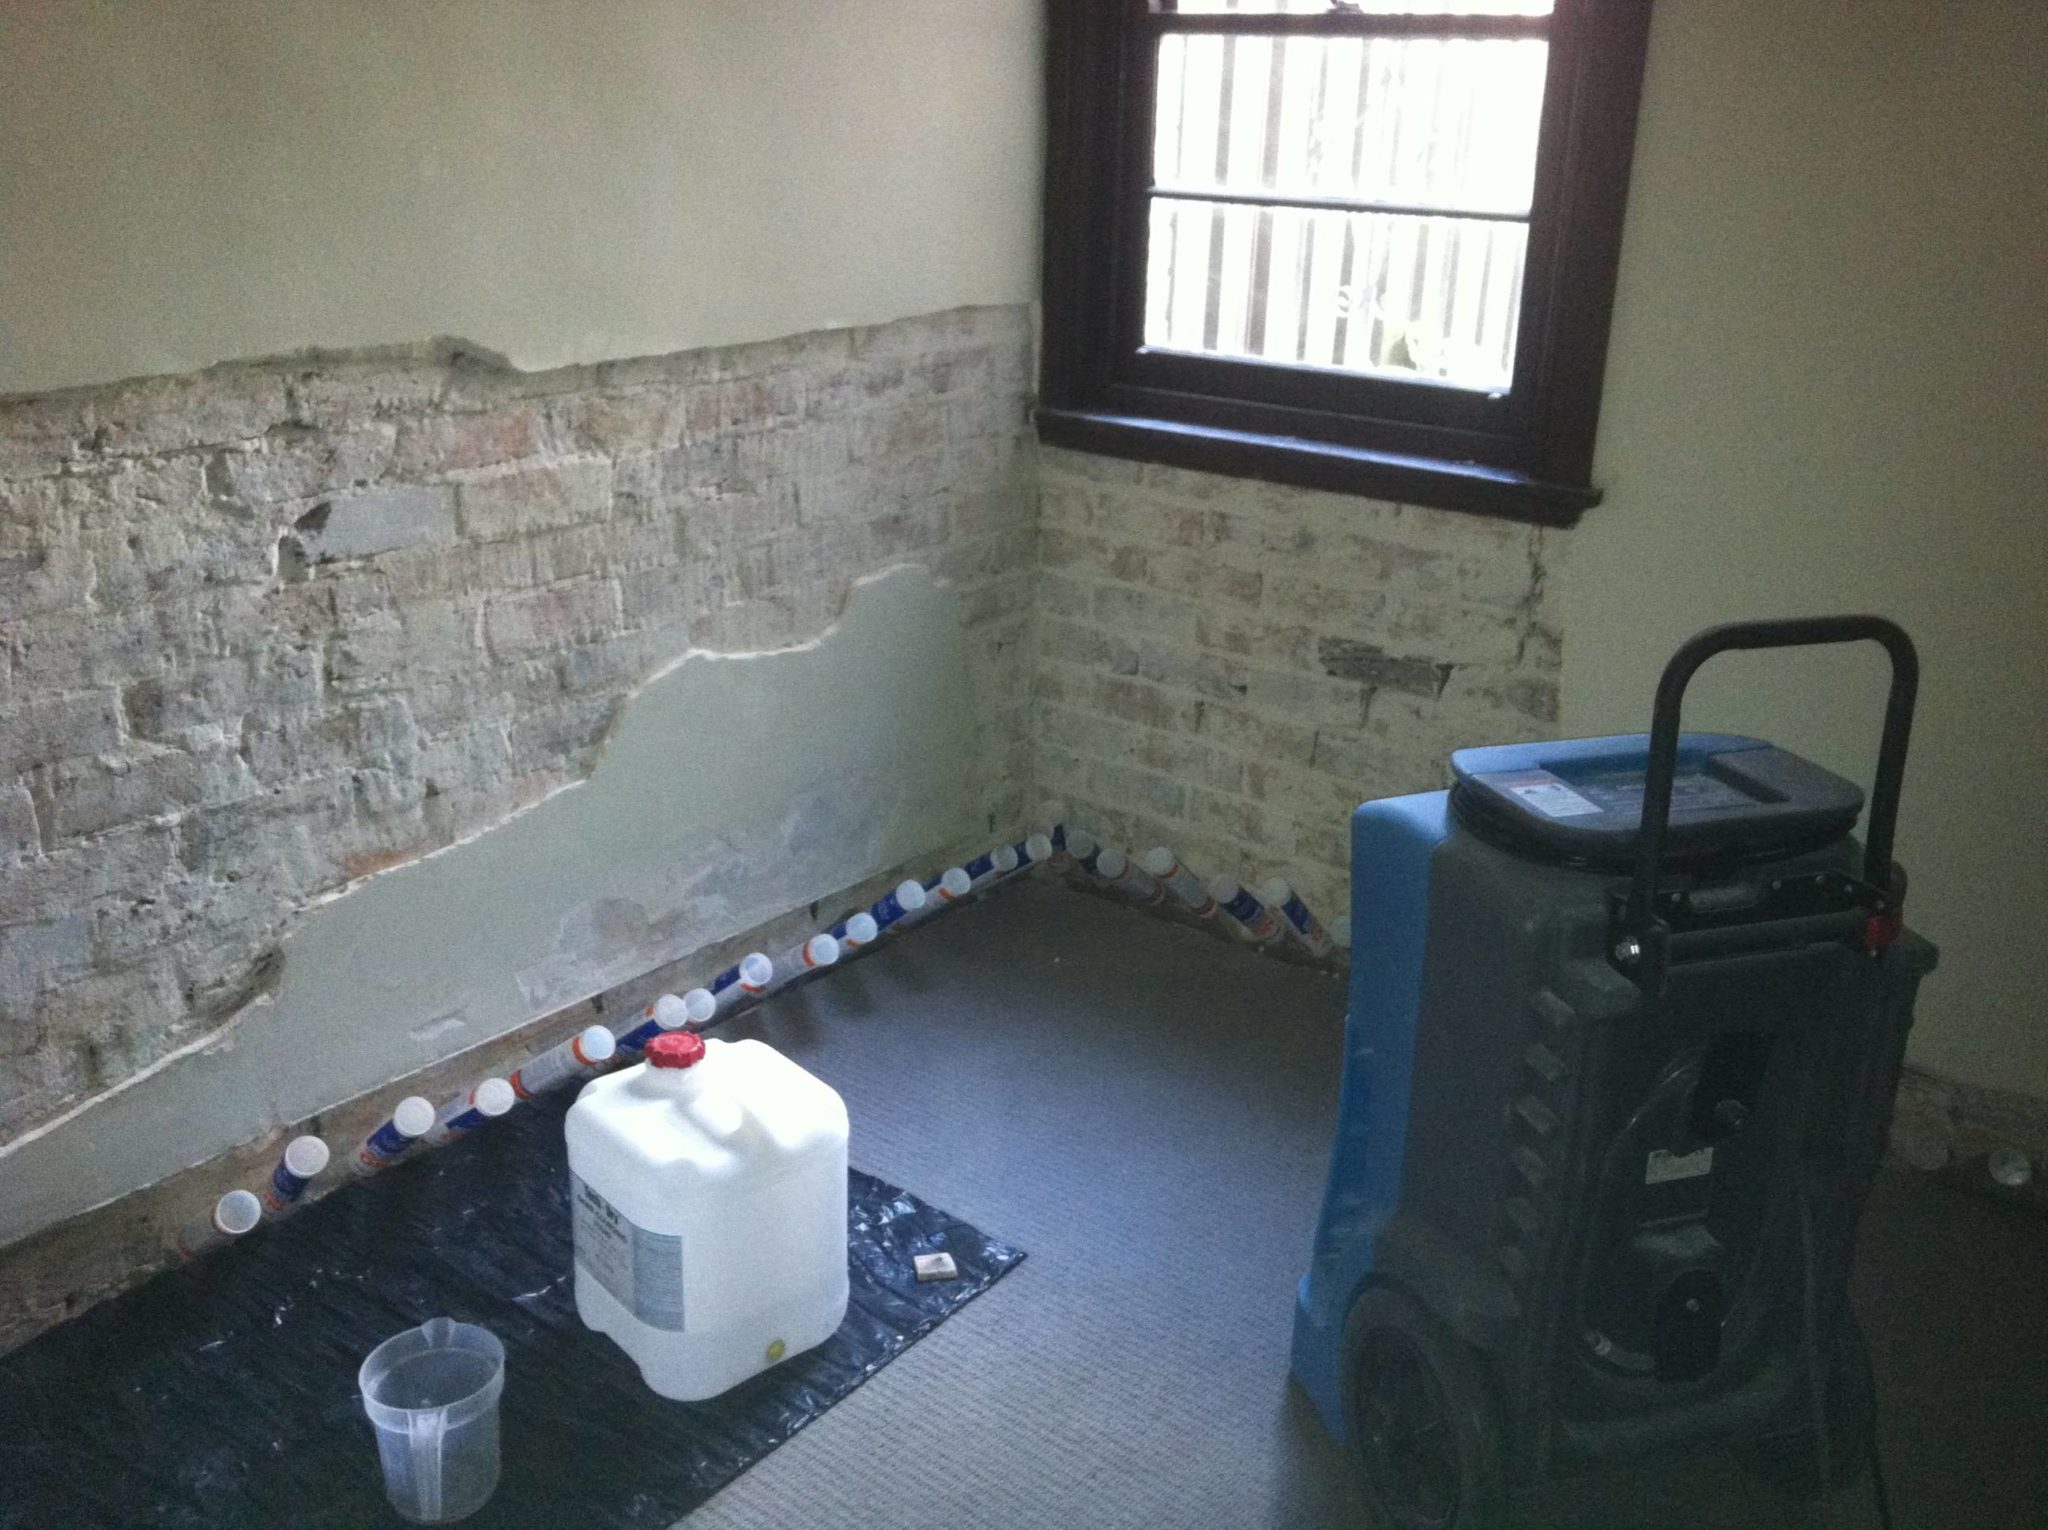 Rising Damp Repairer Queensland - Pureprotect Pty Ltd